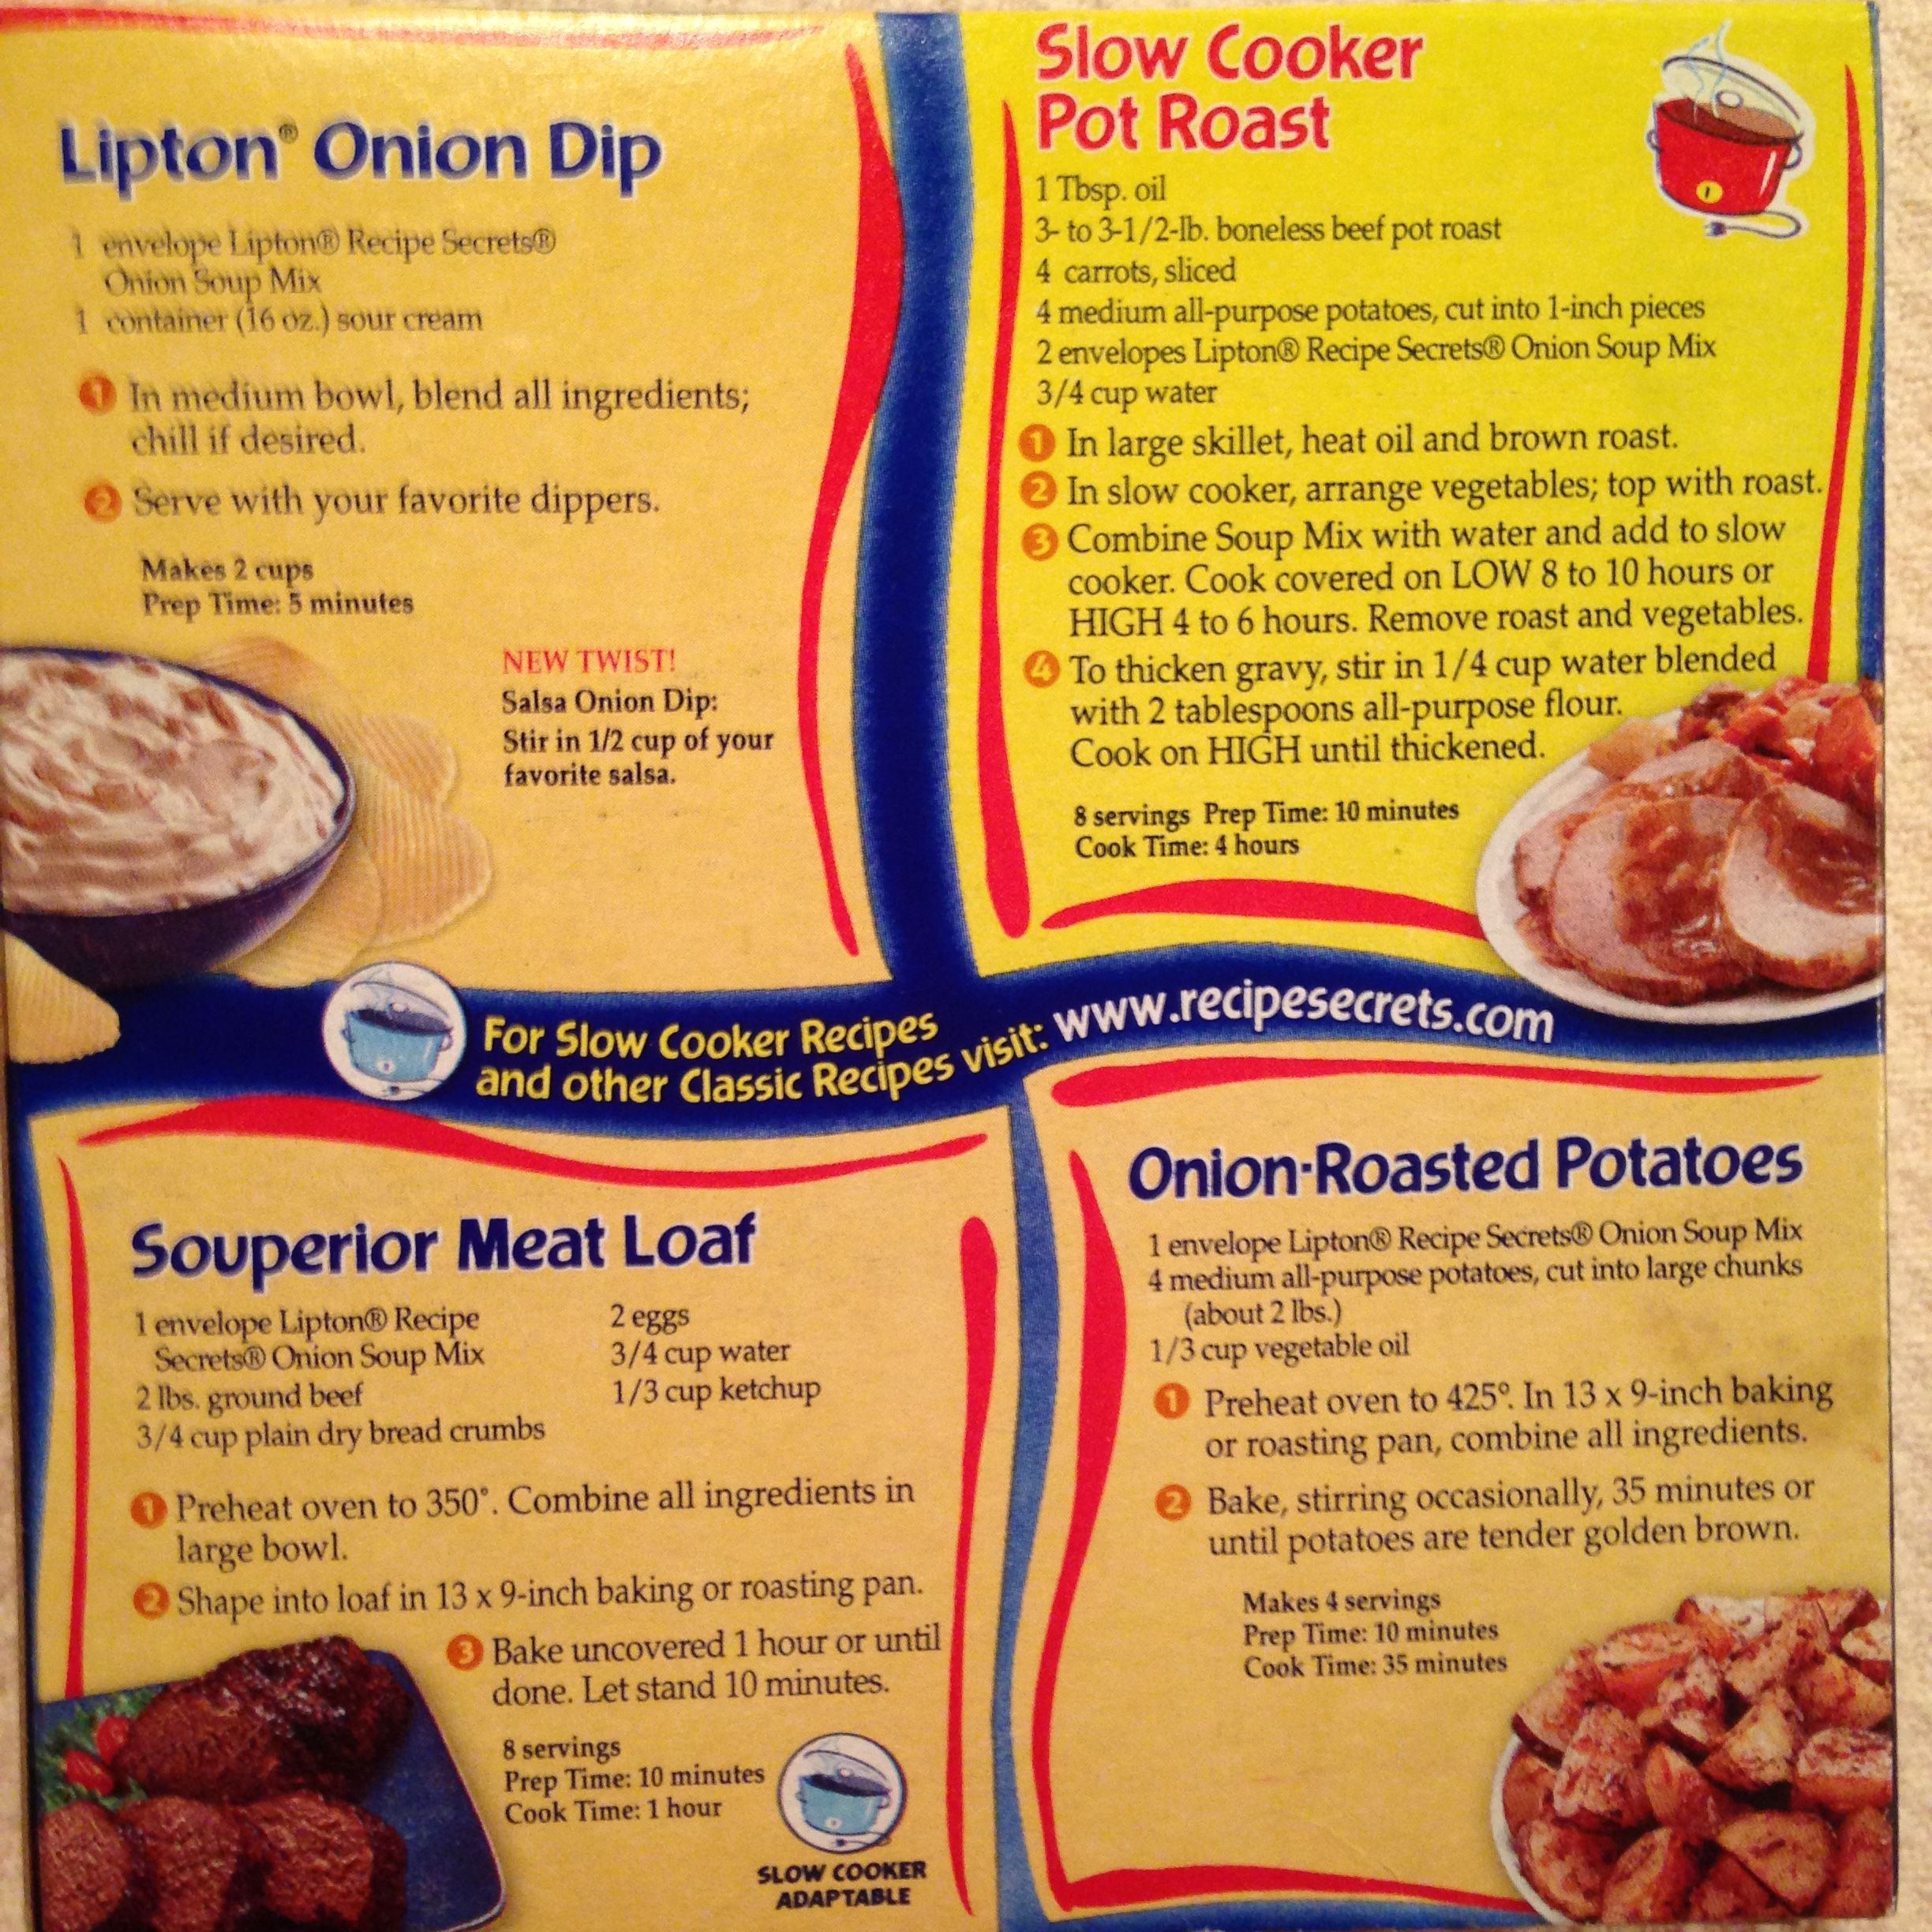 Lipton Onion Soup recipes from the back of the box ...